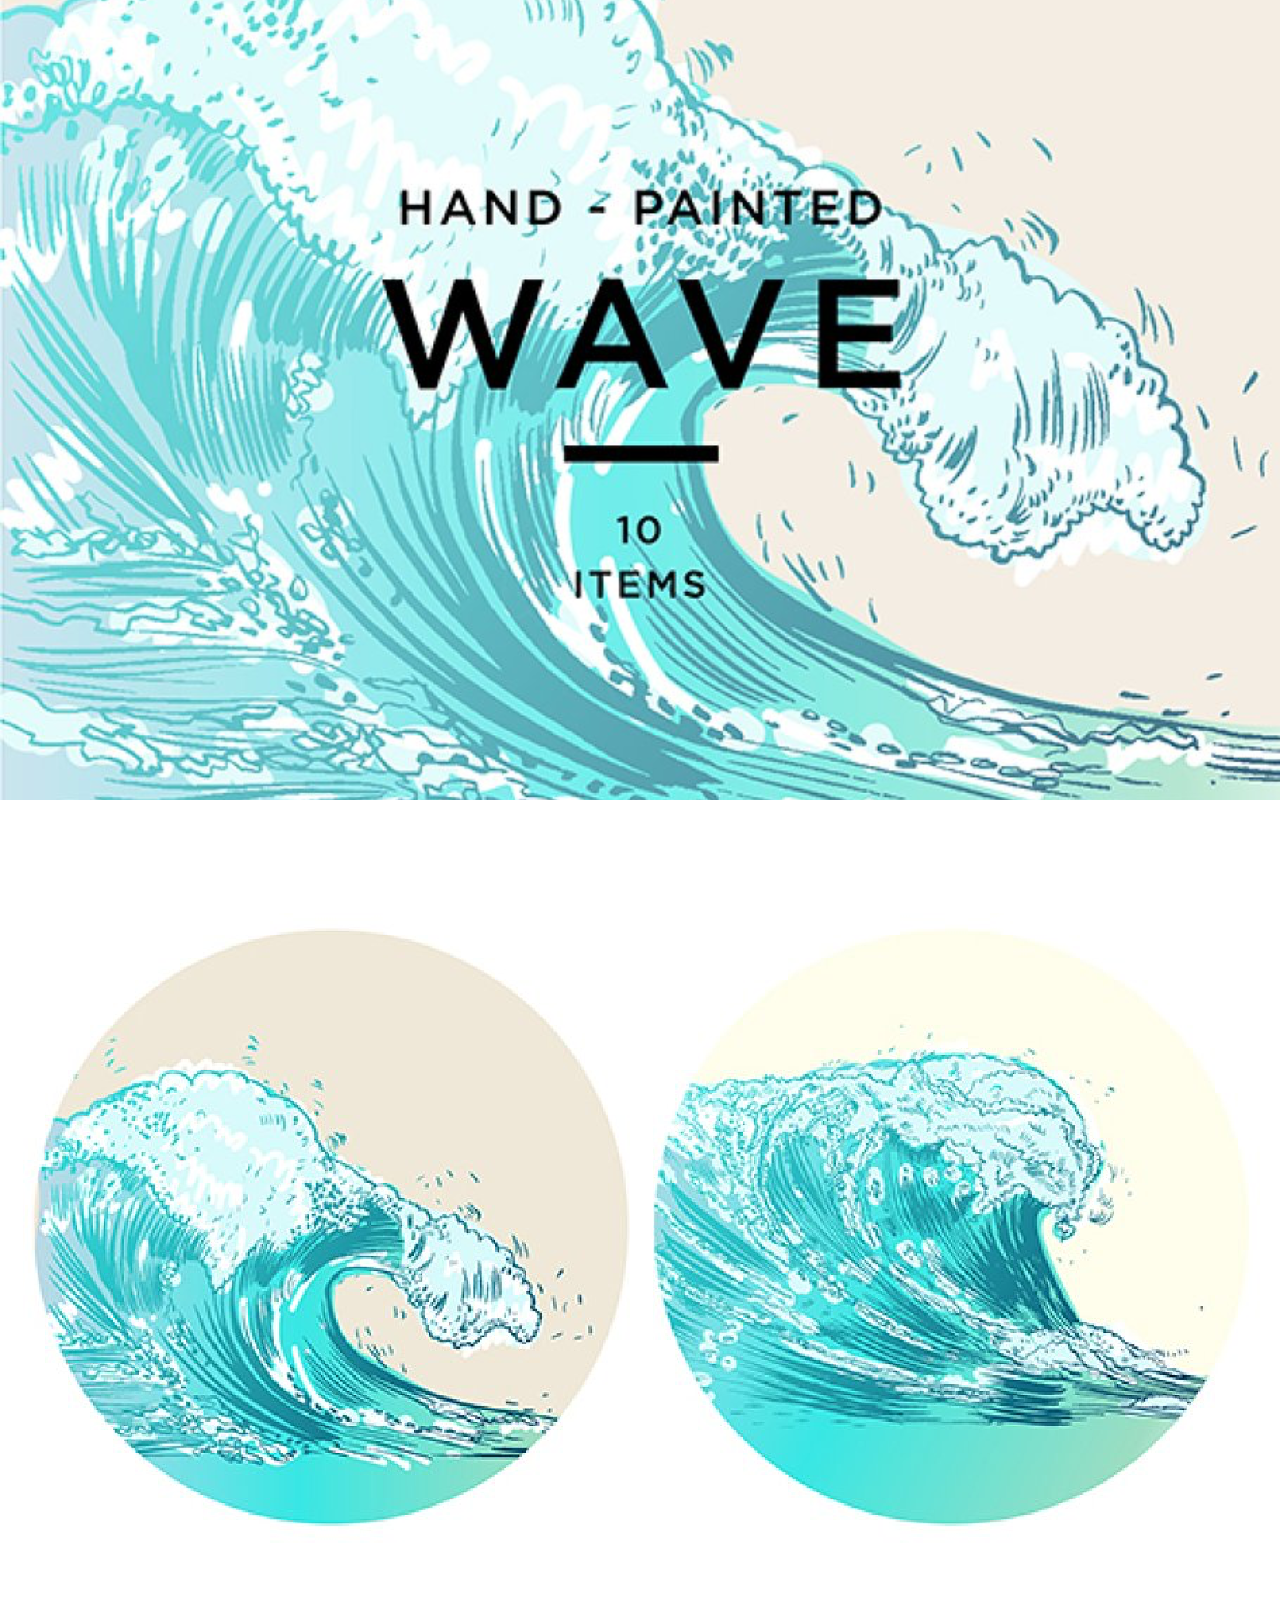 Wave pinterest image preview.